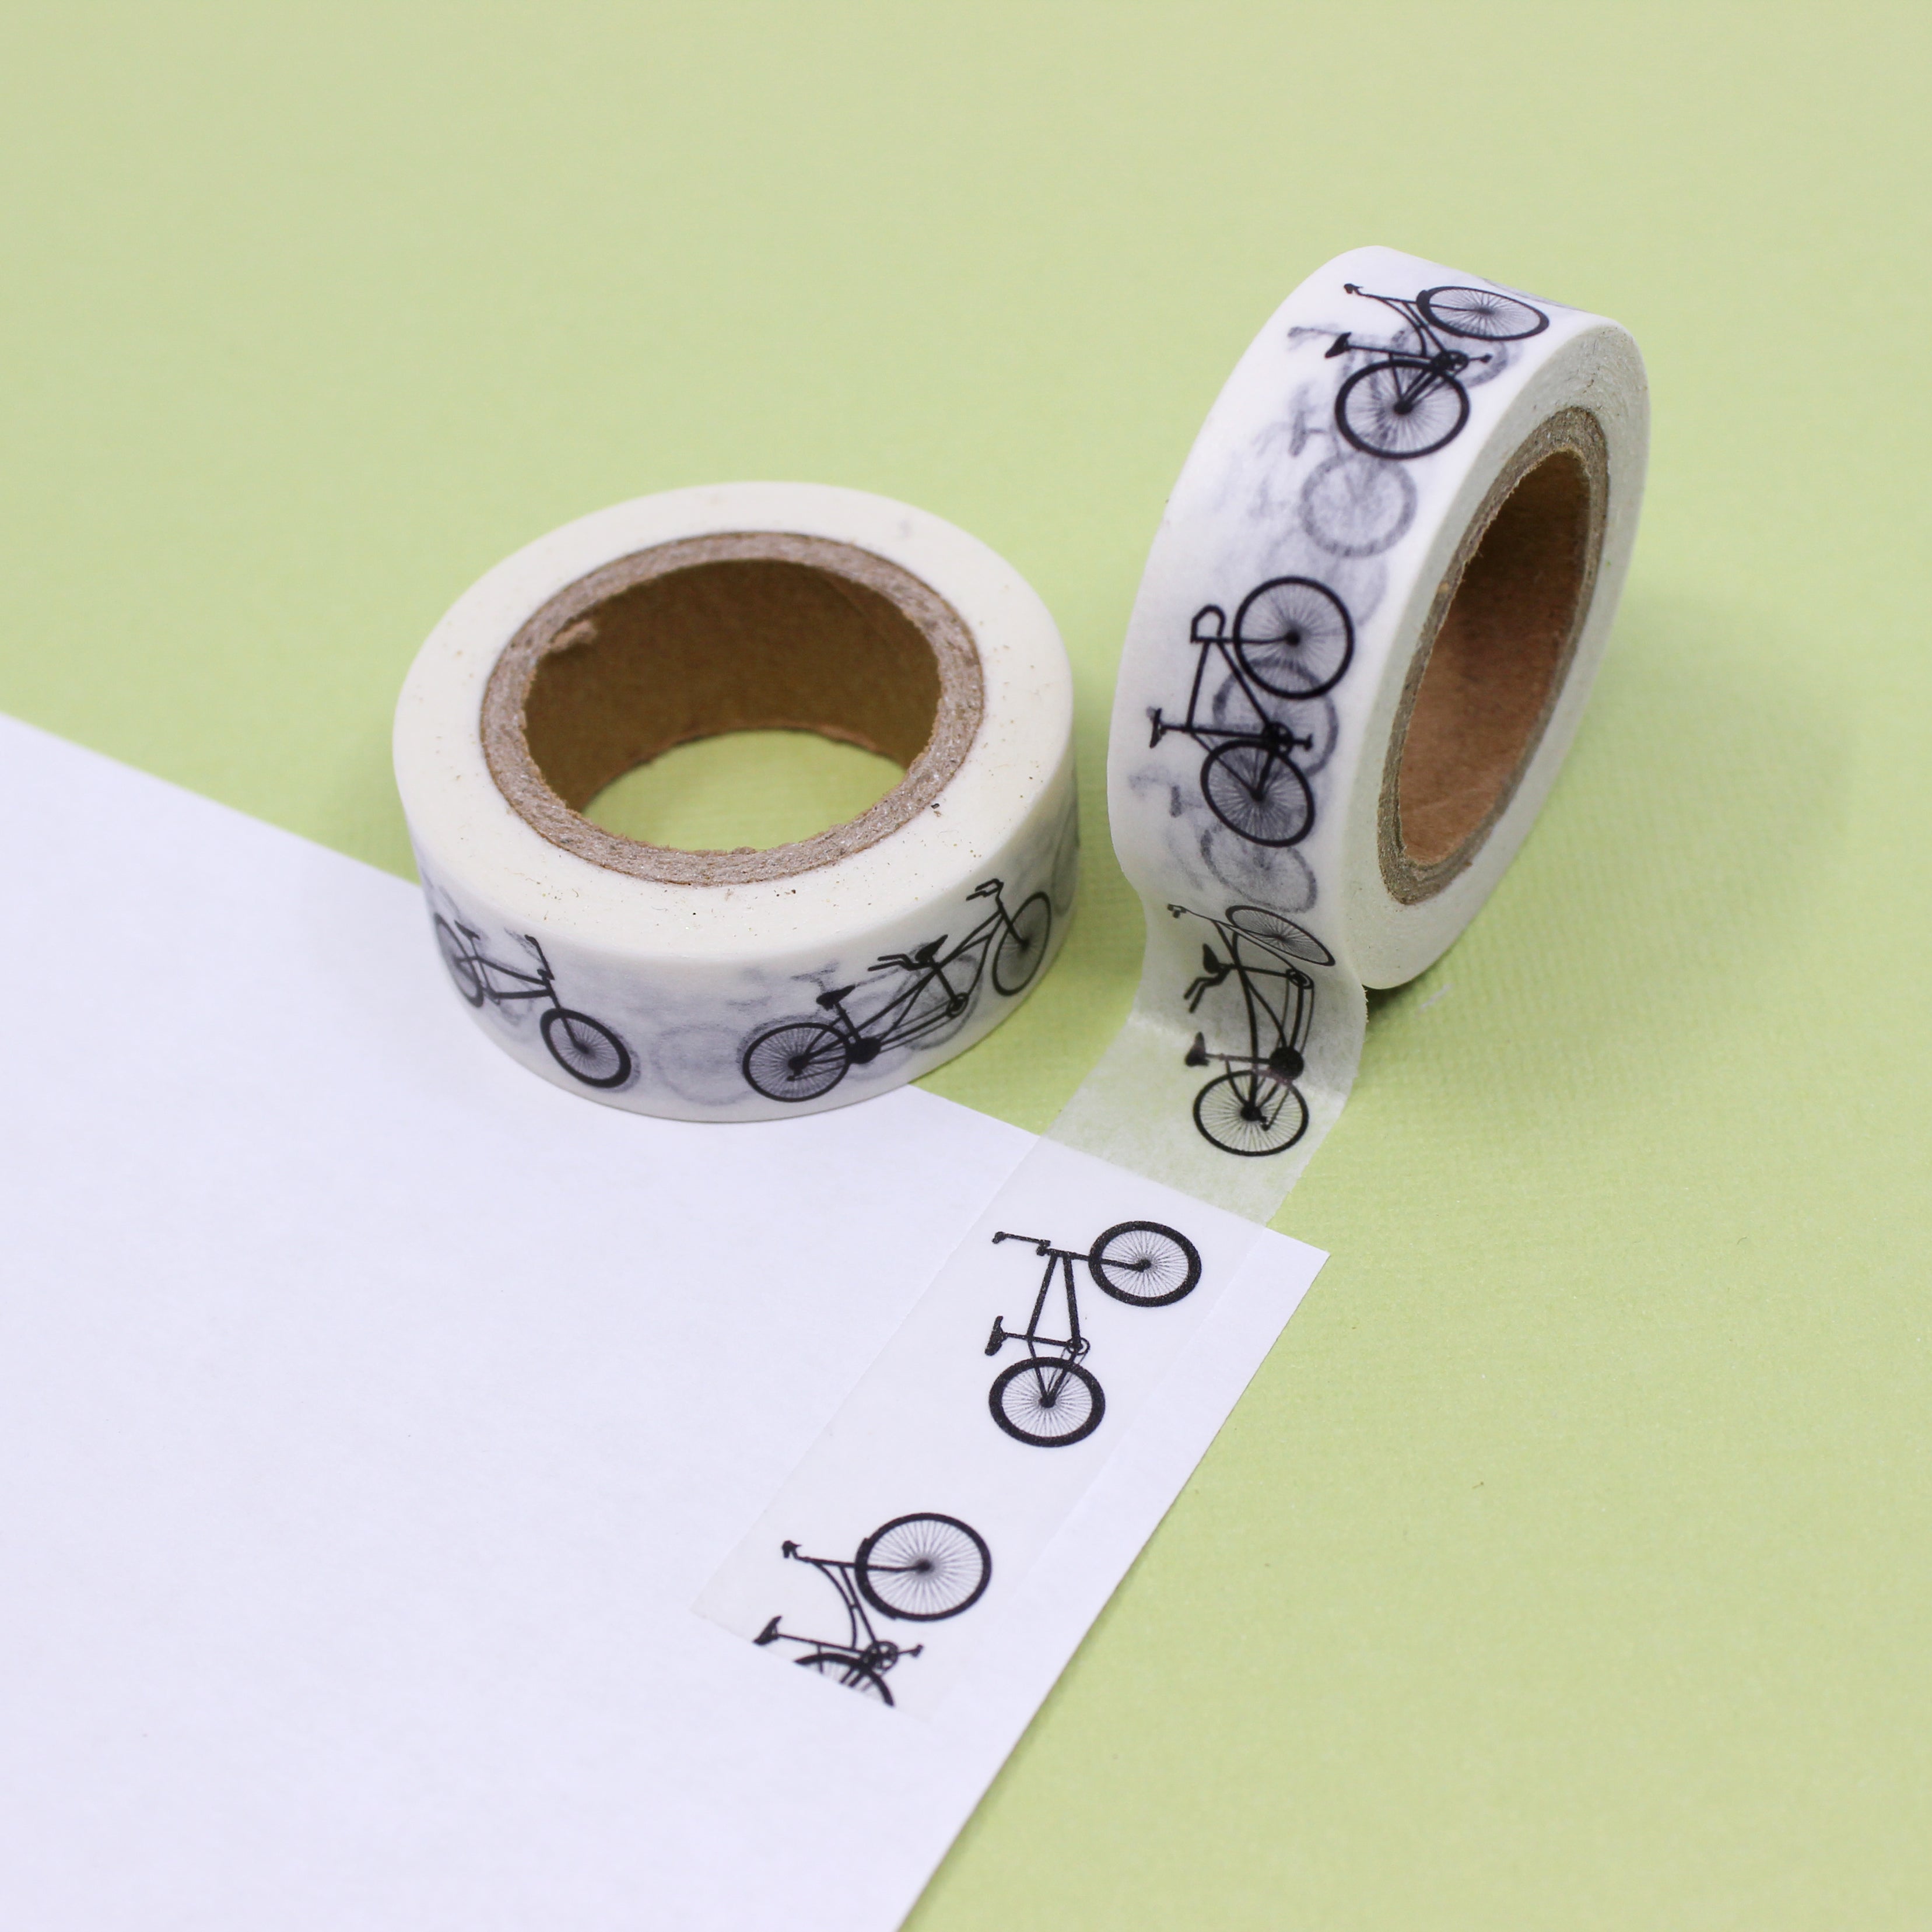 This is a black old graphics bicycle view themed washi tape from BBB Supplies Craft Shop